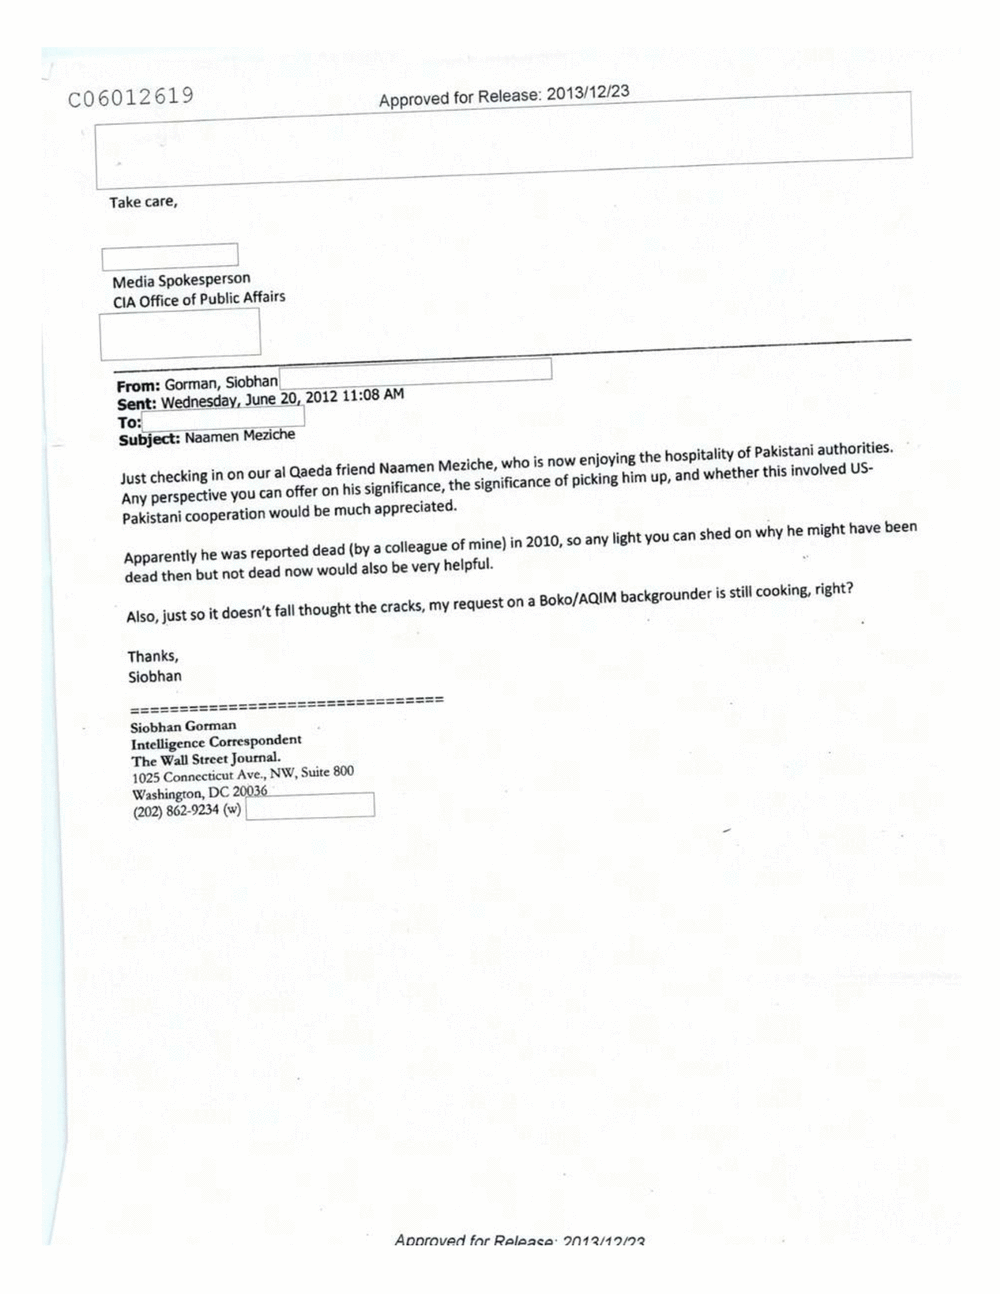 Page 166 from Email Correspondence Between Reporters and CIA Flacks